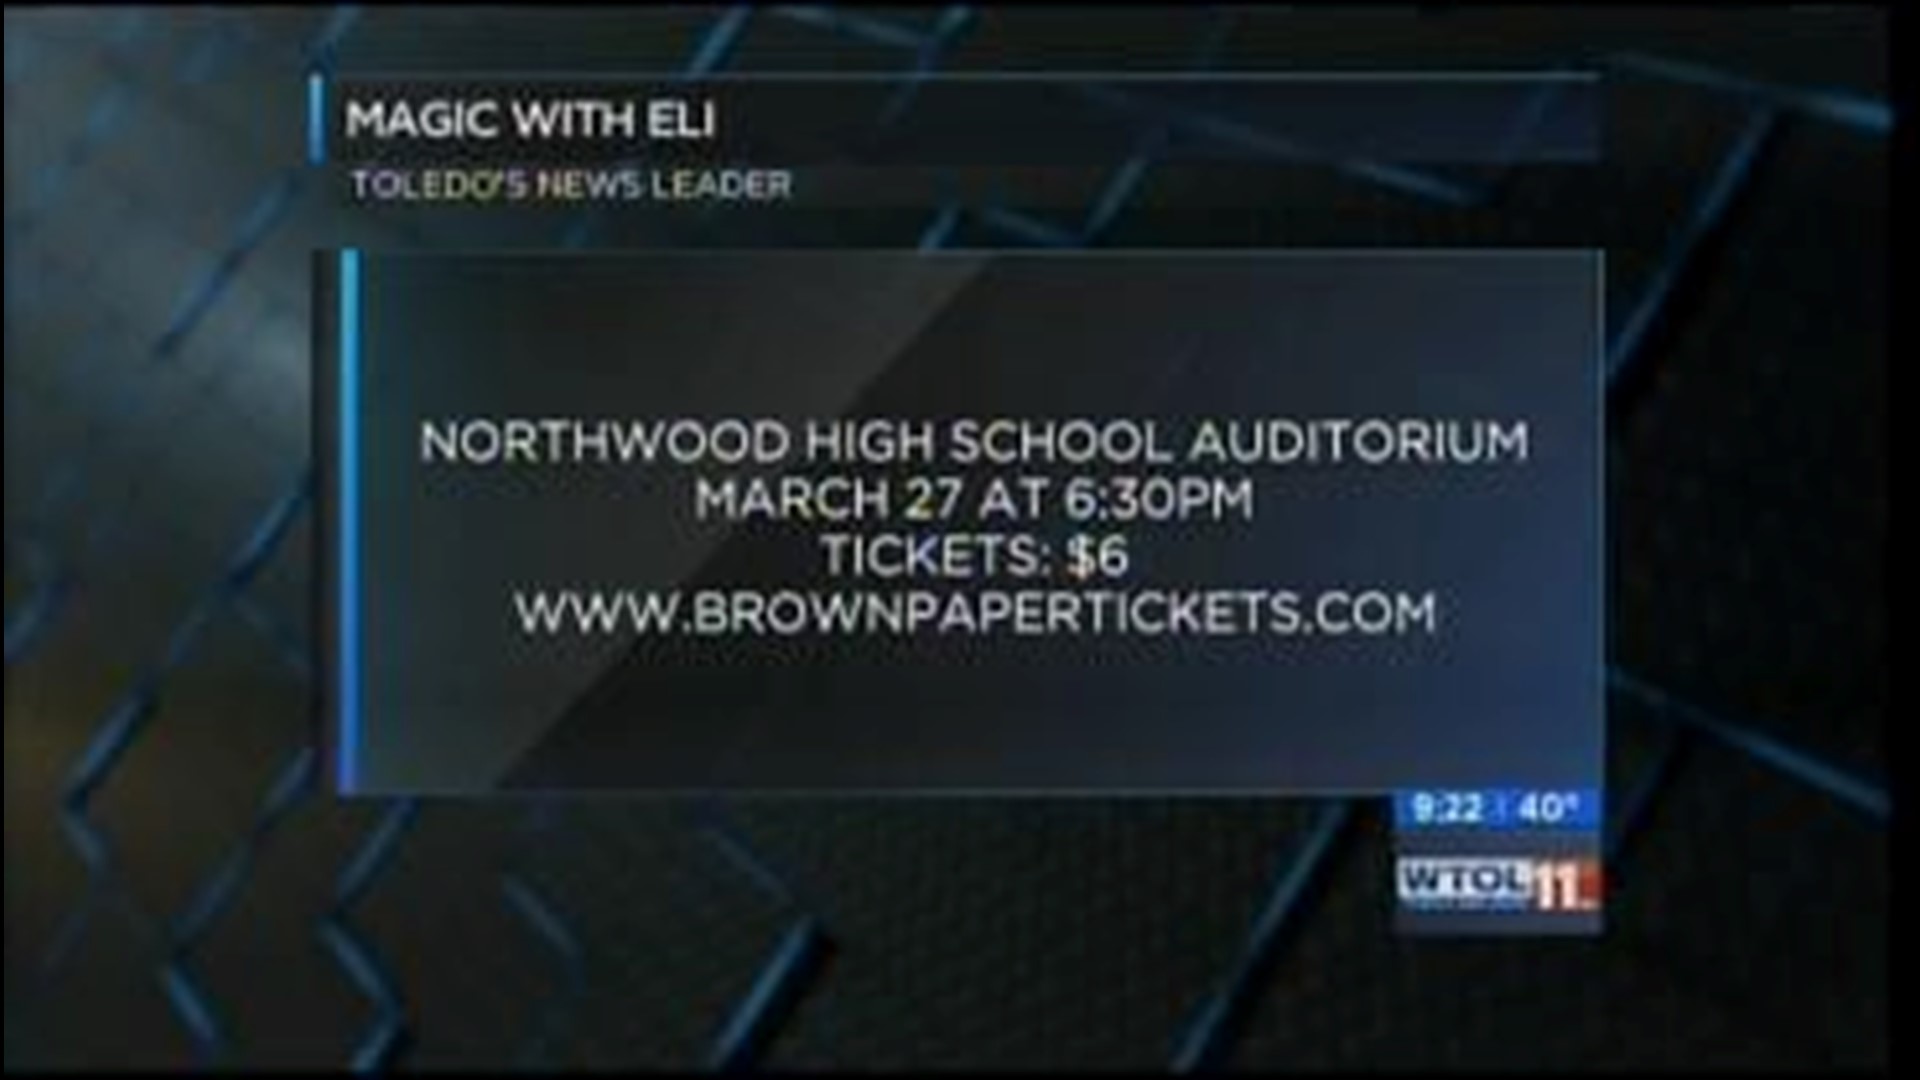 Eli the Magician joins WTOL Your Morning for preview to Northwood Schools Magic with Eli fundraiser